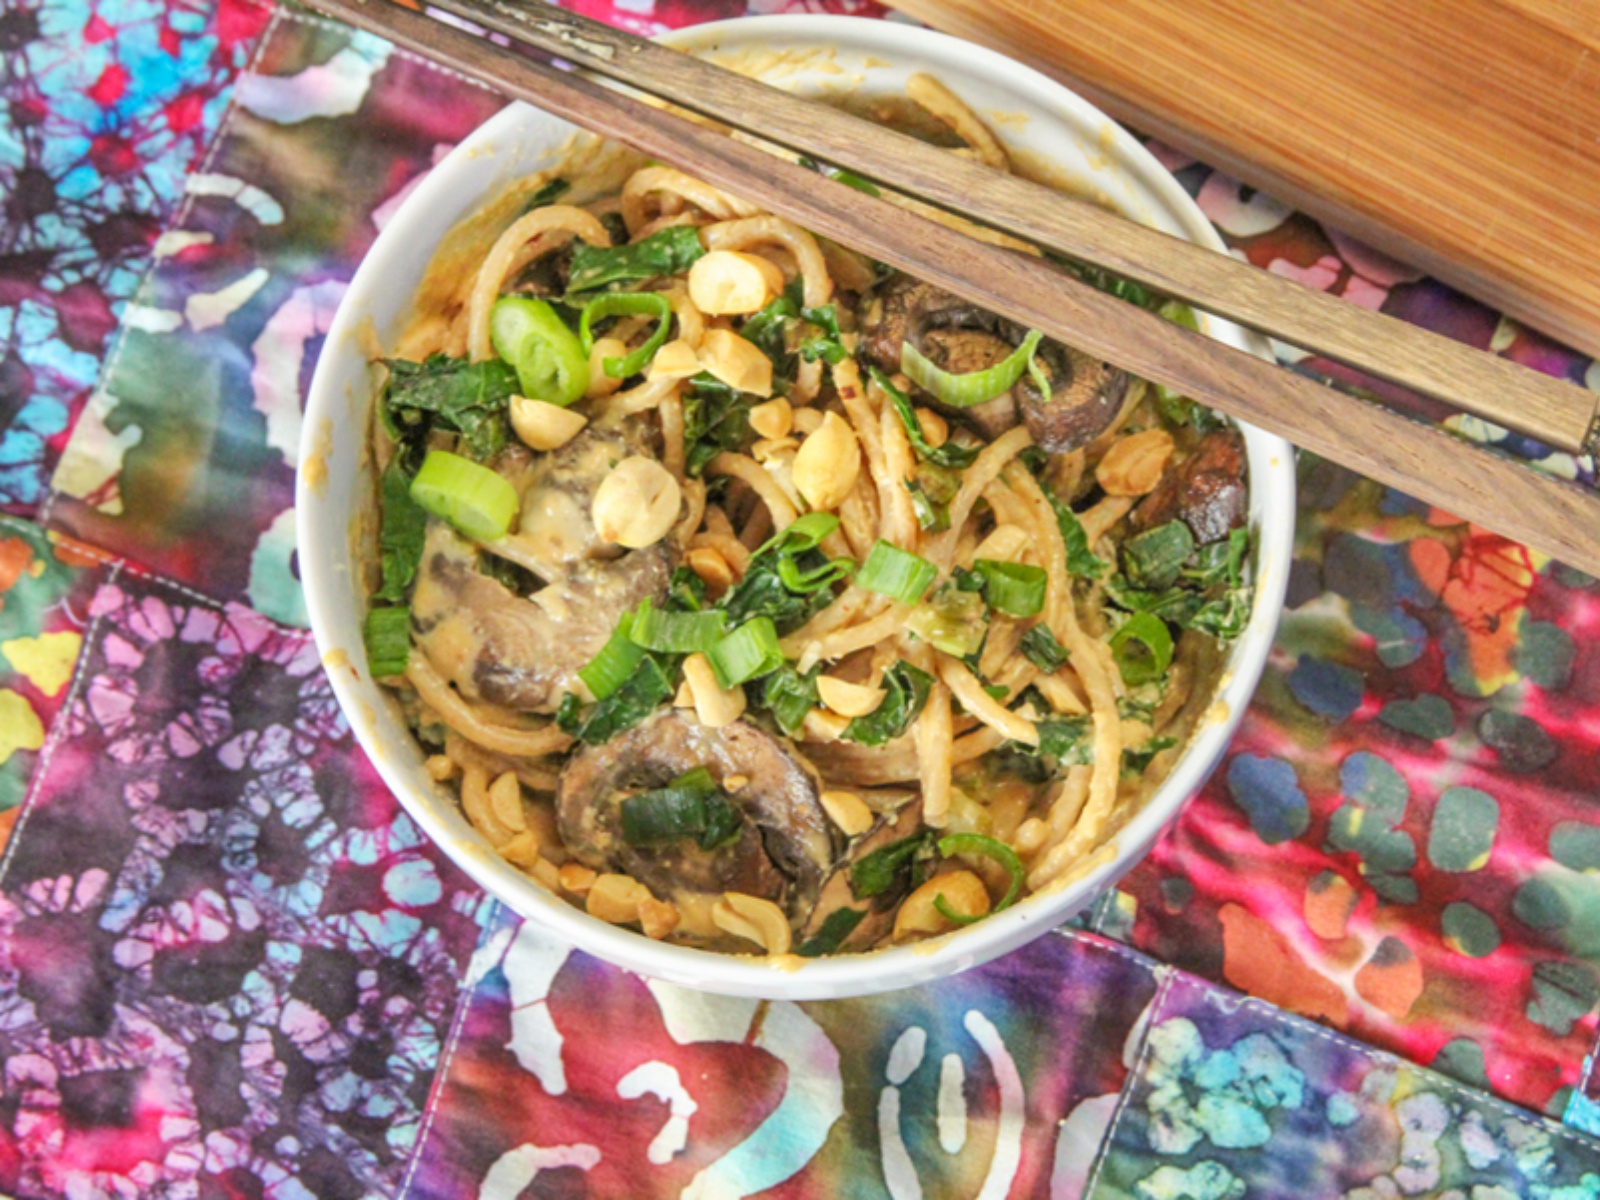 Noodles with vegetables and spicy Sichuan peanut sauce